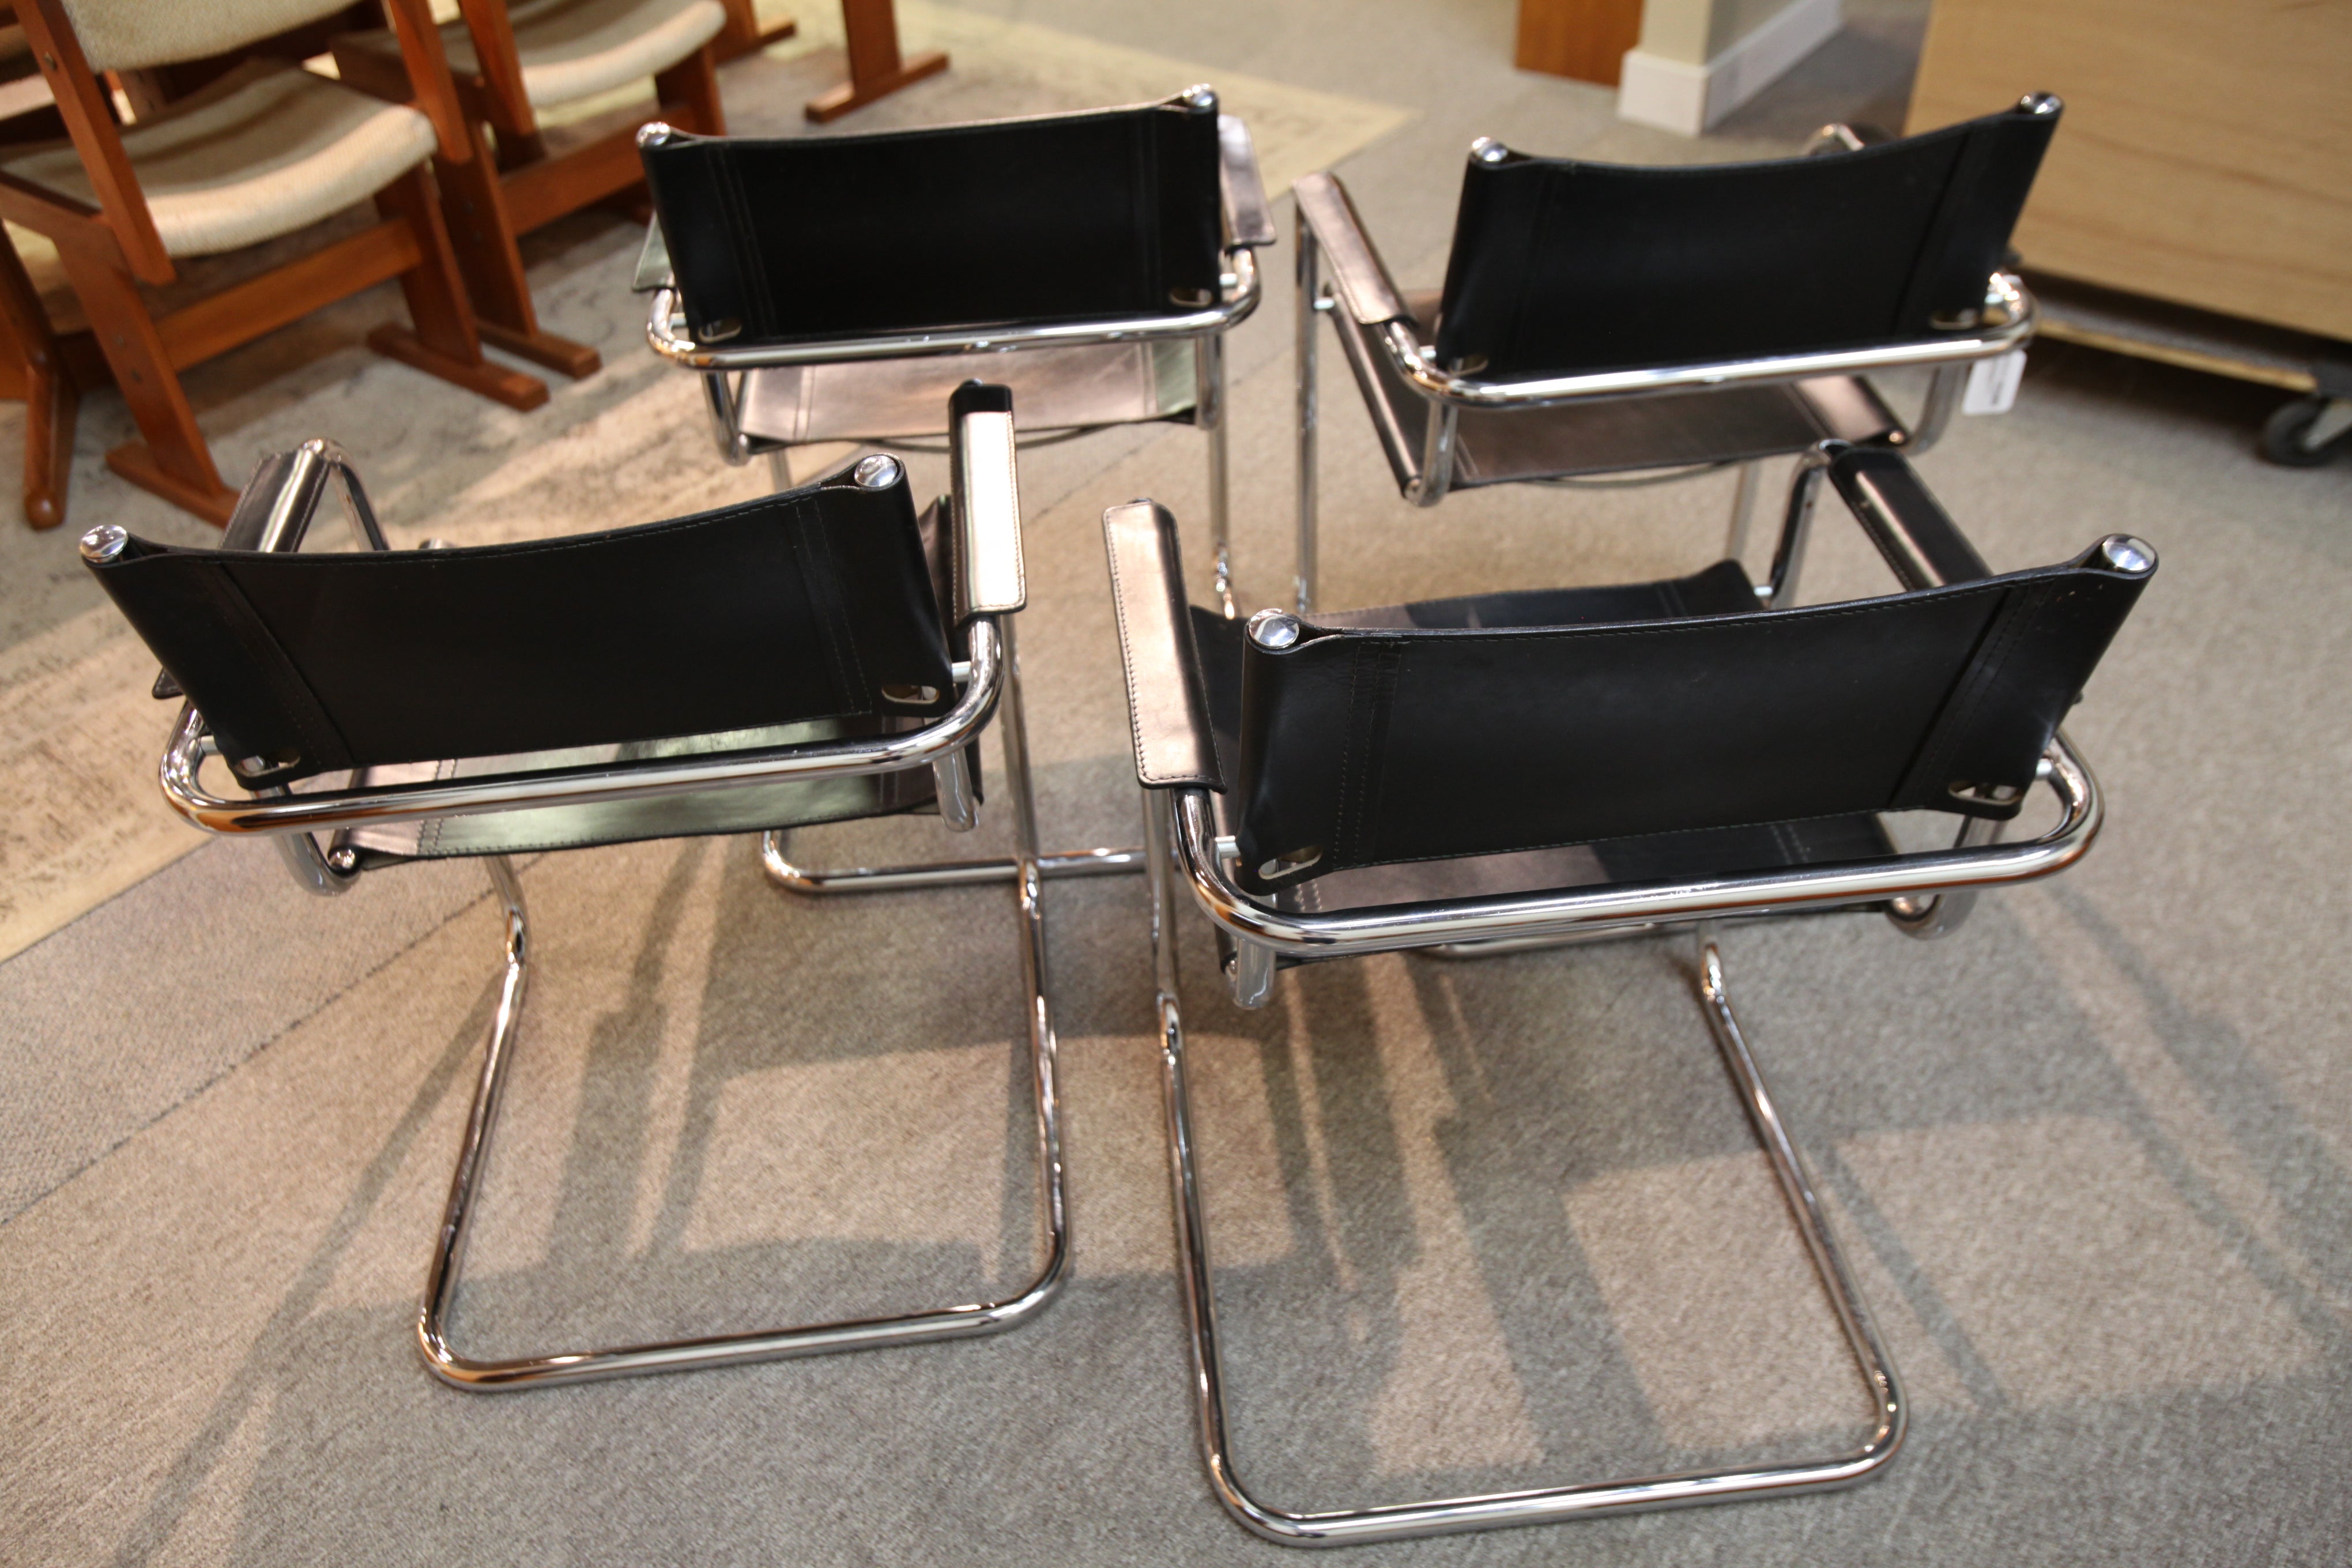 Set of 4 Marcel Breuer Style Leather / Chrome Chairs (Seat 17"H)